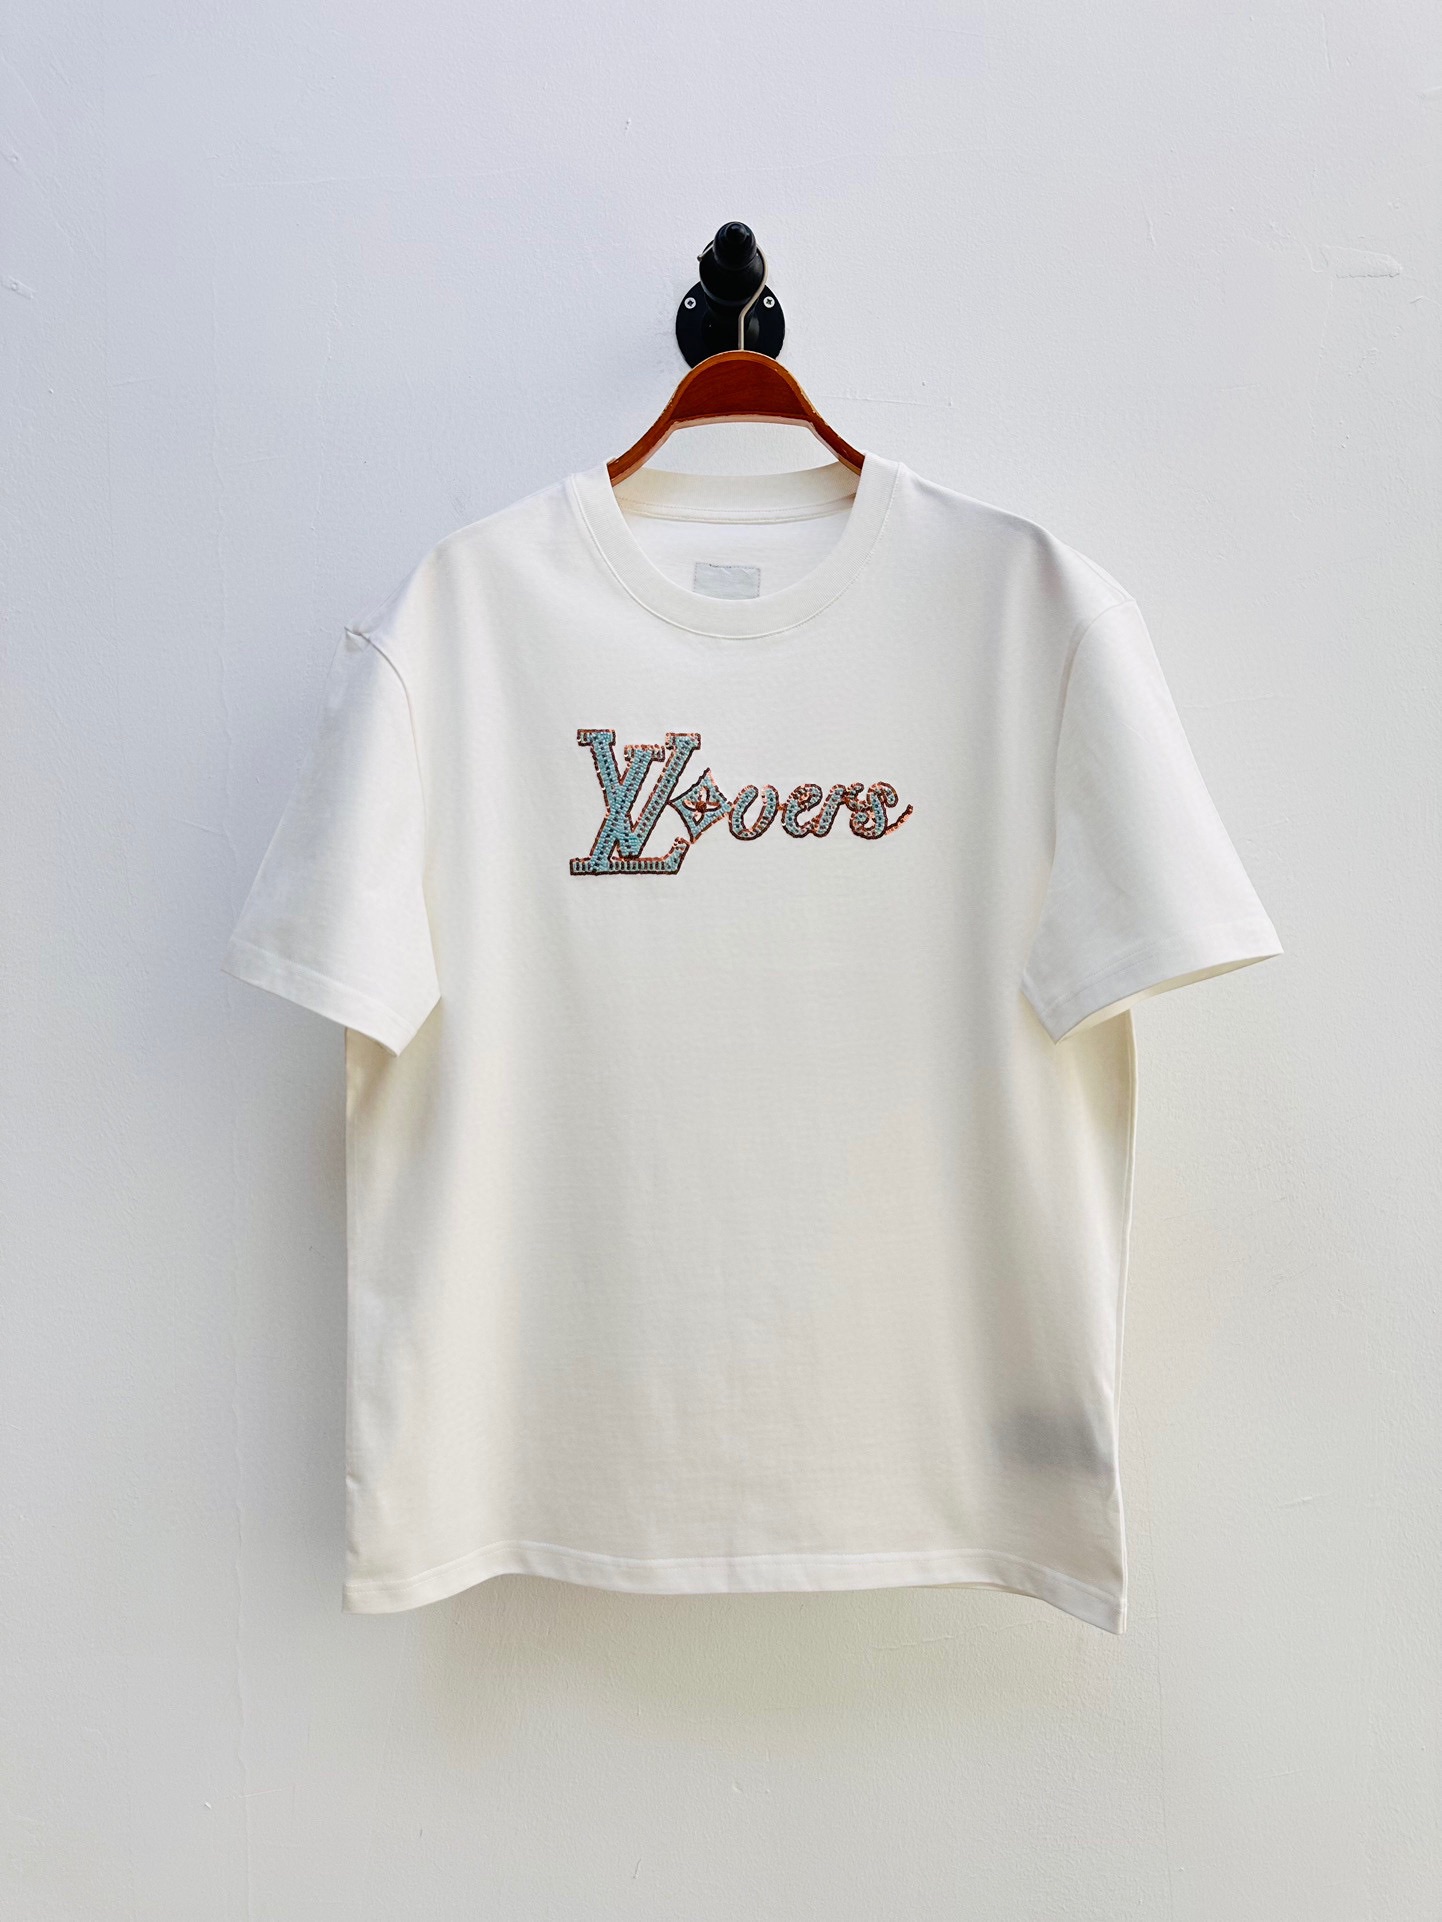 Louis Vuitton Clothing T-Shirt Wholesale Replica Shop
 Beige White Cotton Knitted Knitting Vintage